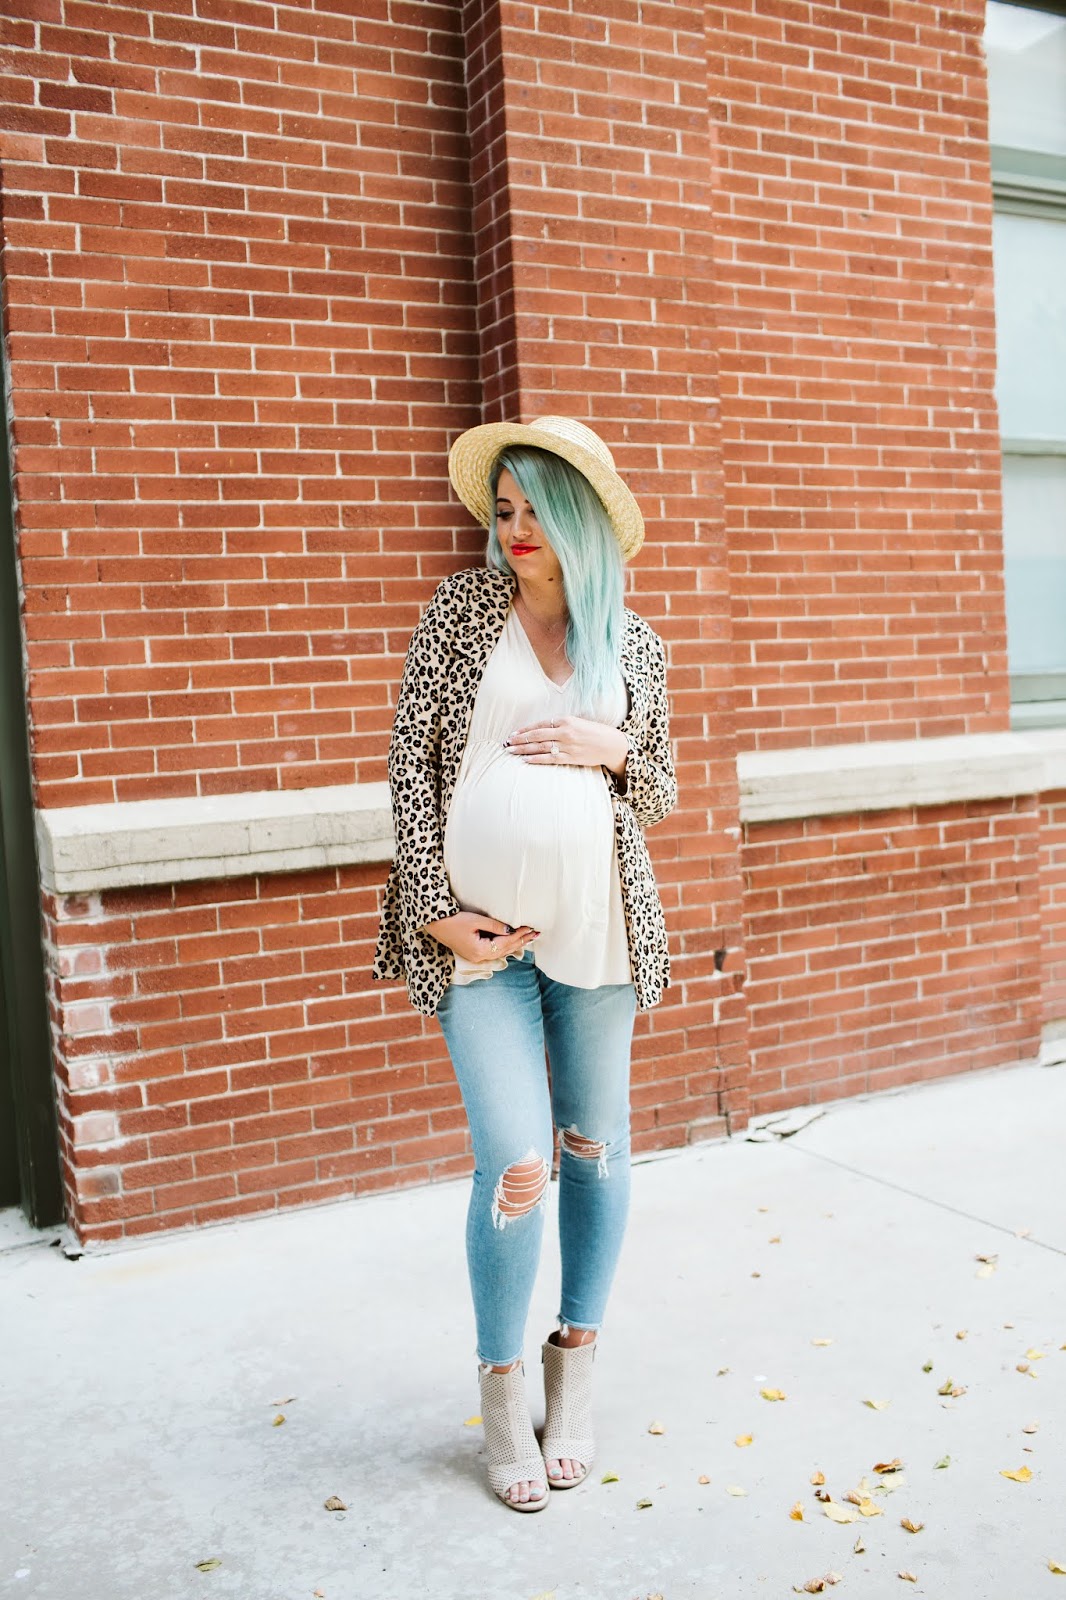 Fall Maternity Outfit, She's Apples LipSense, Mint Hair